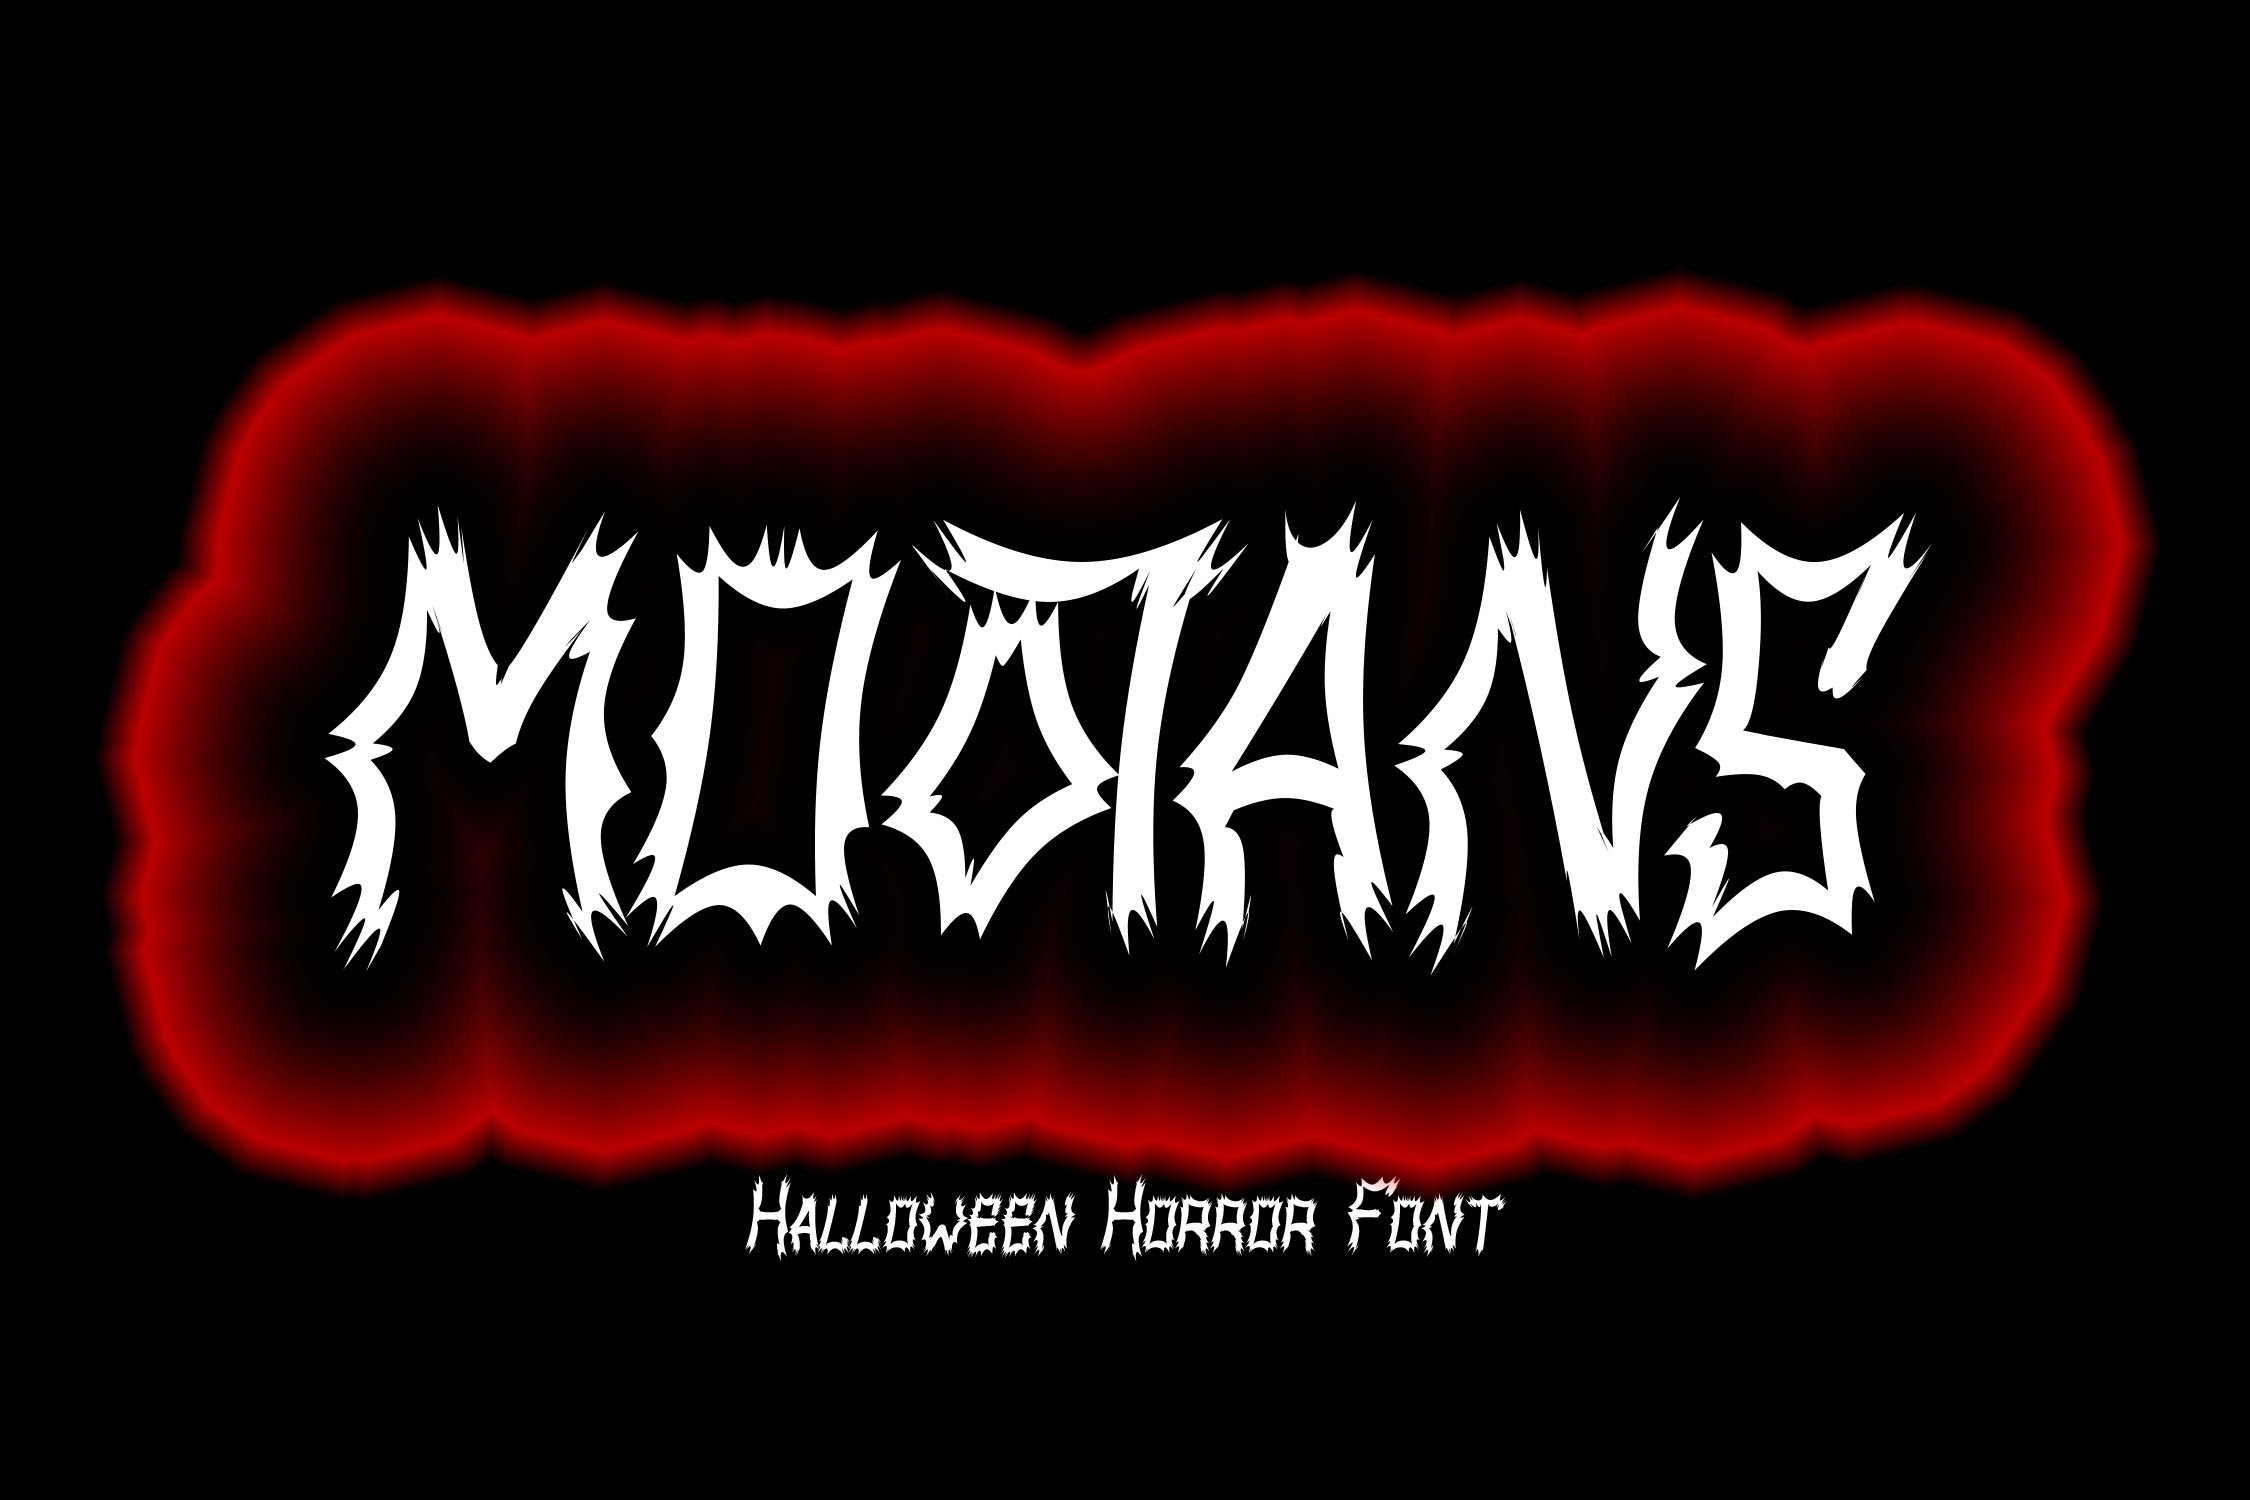 MOOTANS - Halloween Font cover image.